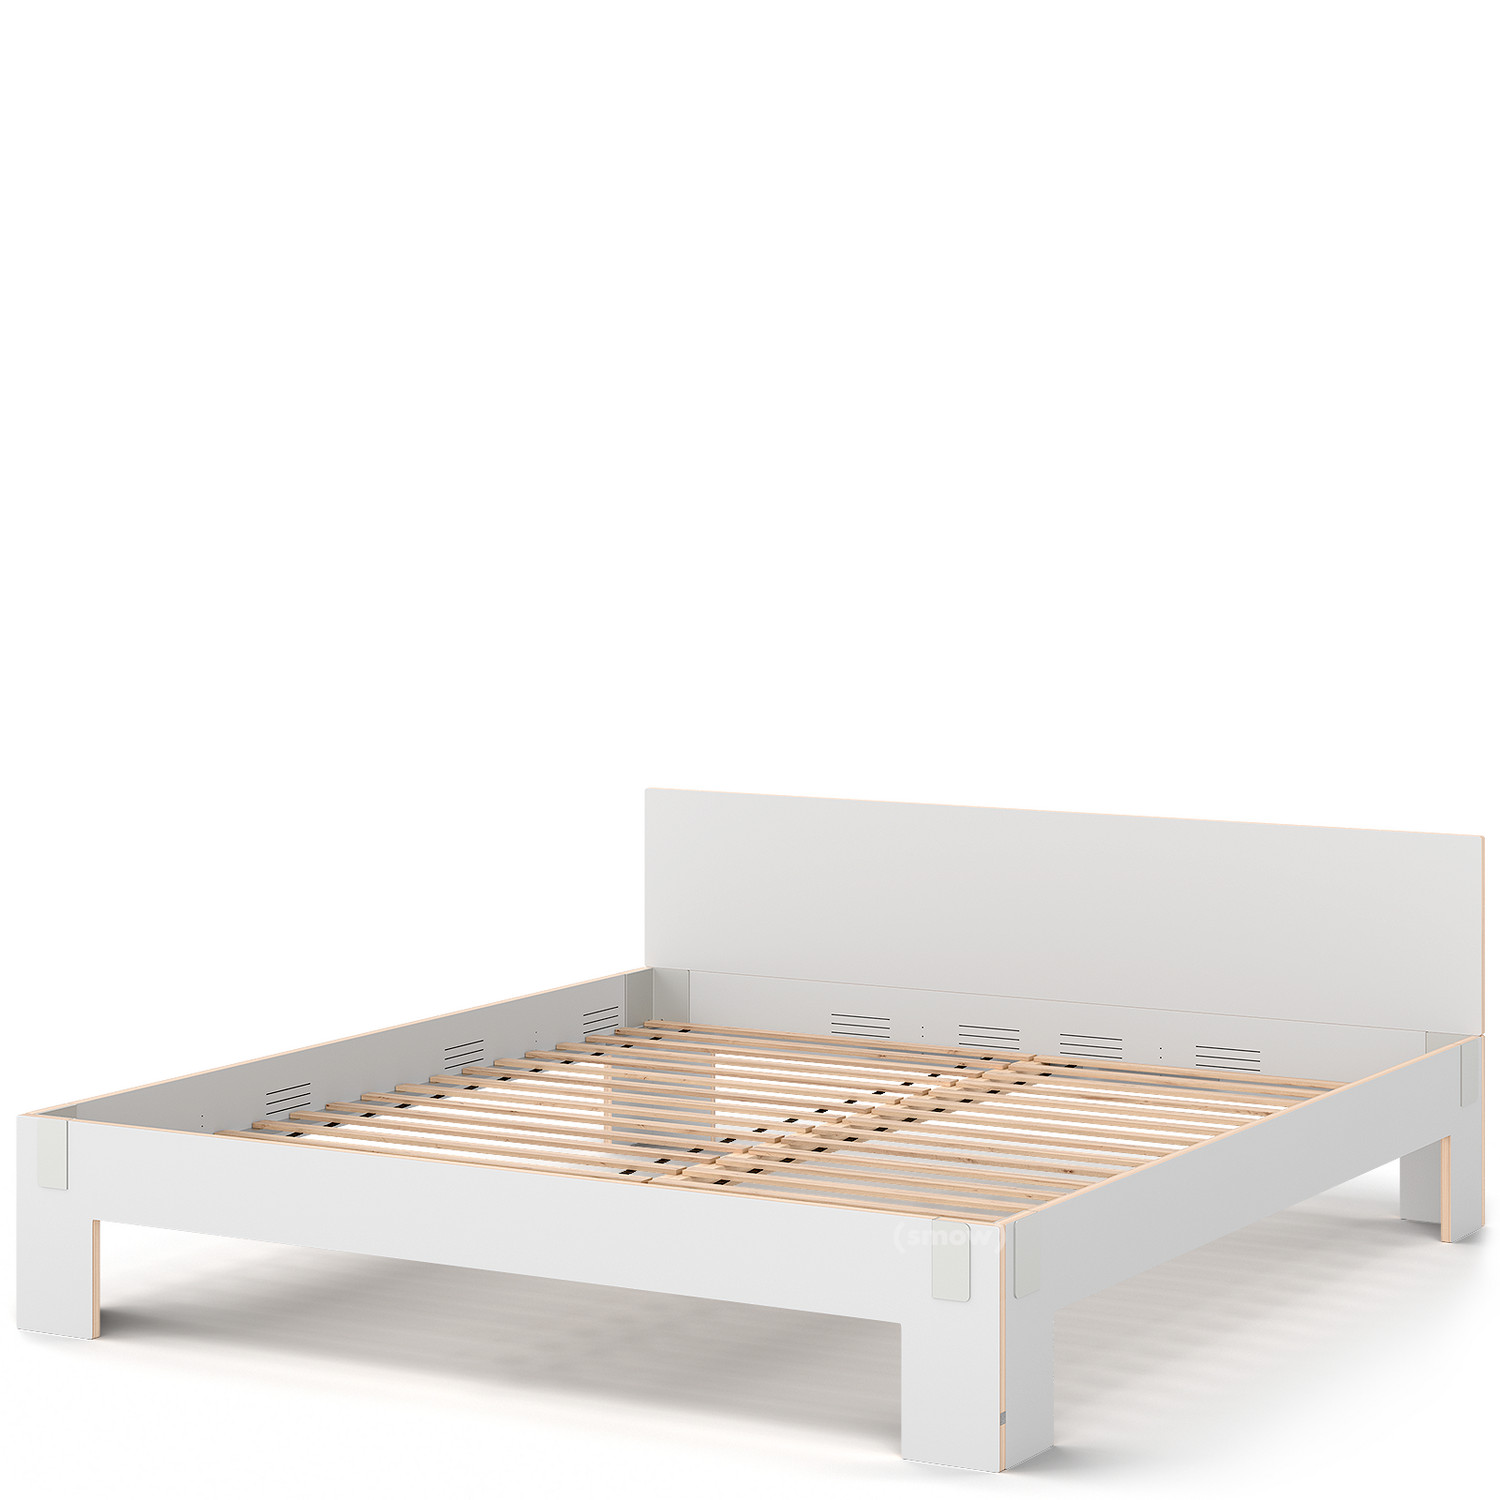 Nils Moormann Tagedieb, 200 x 220 cm, With headboard, FU (plywood, birch) white, Light grey, With rollable slatted base by Carmen Buttjer, 2013 - Designer furniture by smow.com